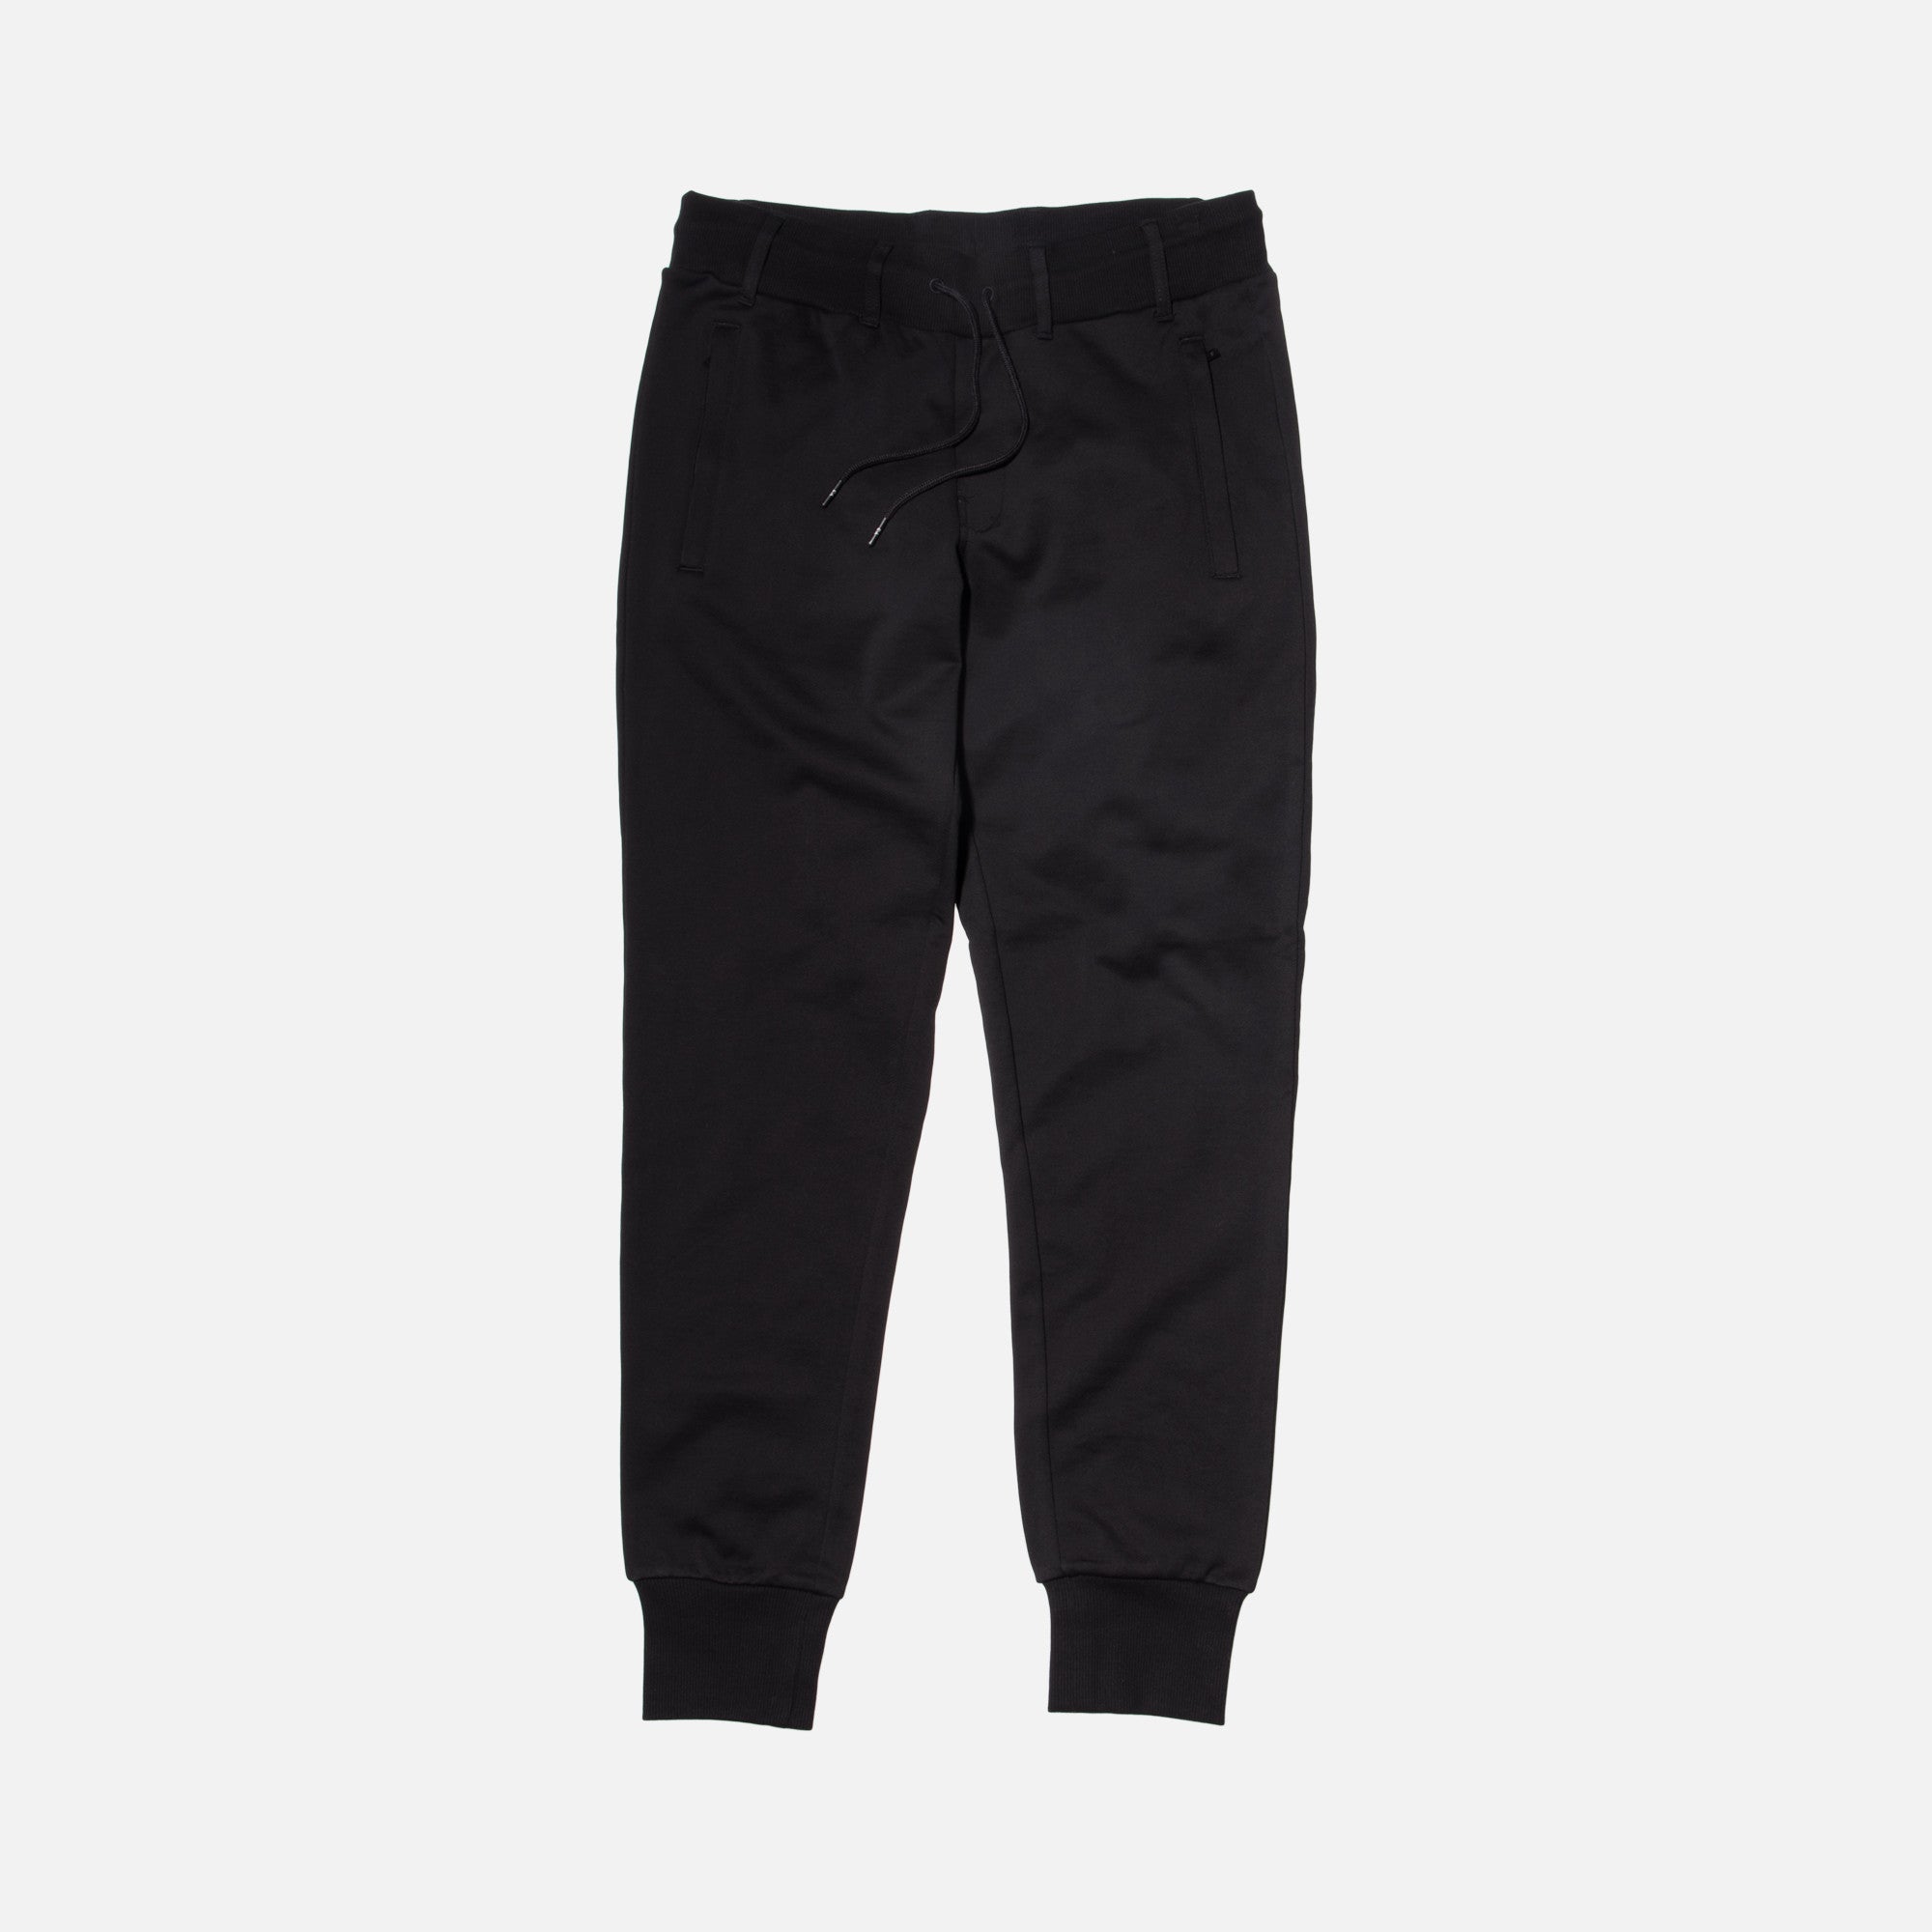 Y-3 Classic FT Cuff Pant - Black – Kith